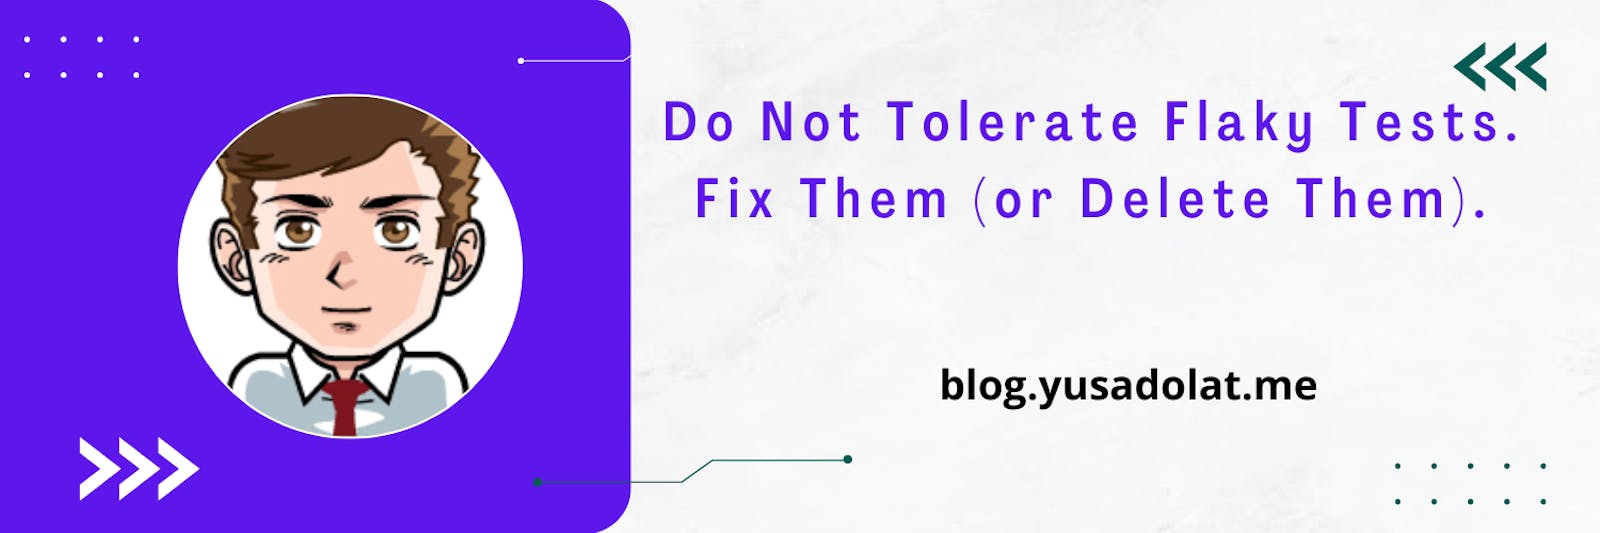 Do Not Tolerate Flaky Tests. Fix Them (or Delete Them).